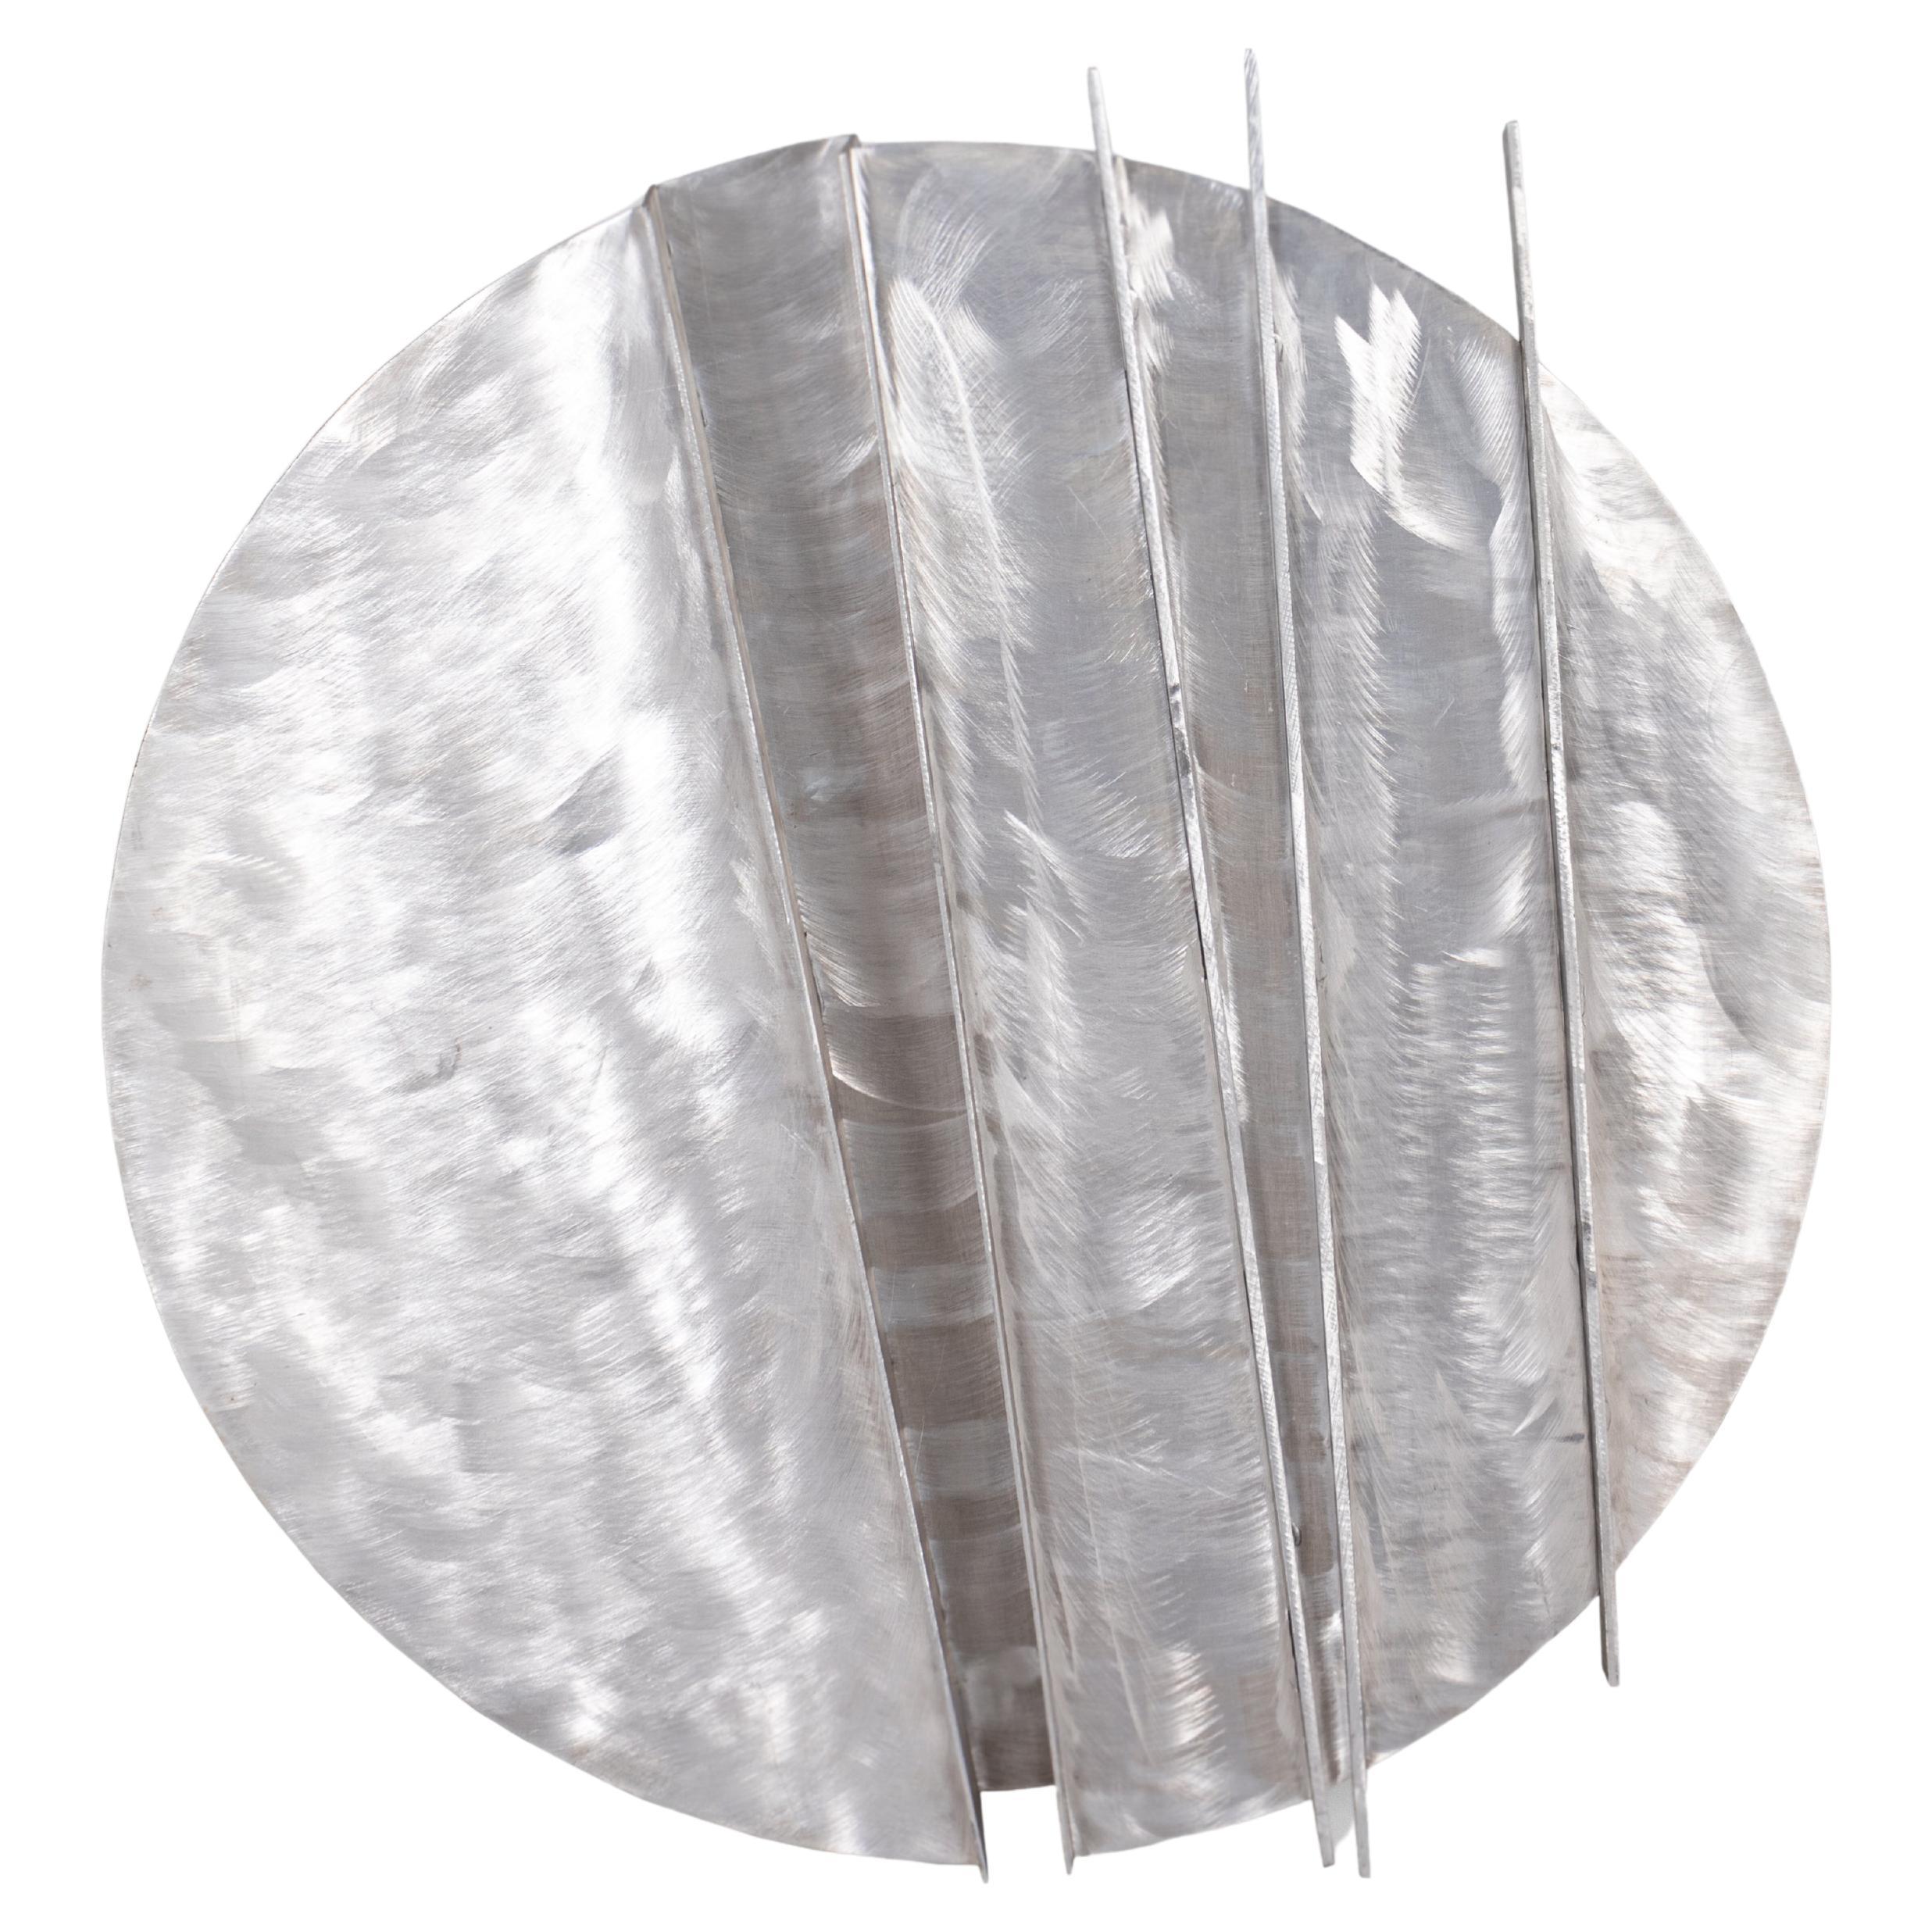 Circular Stainless Steel Wall Art For Sale